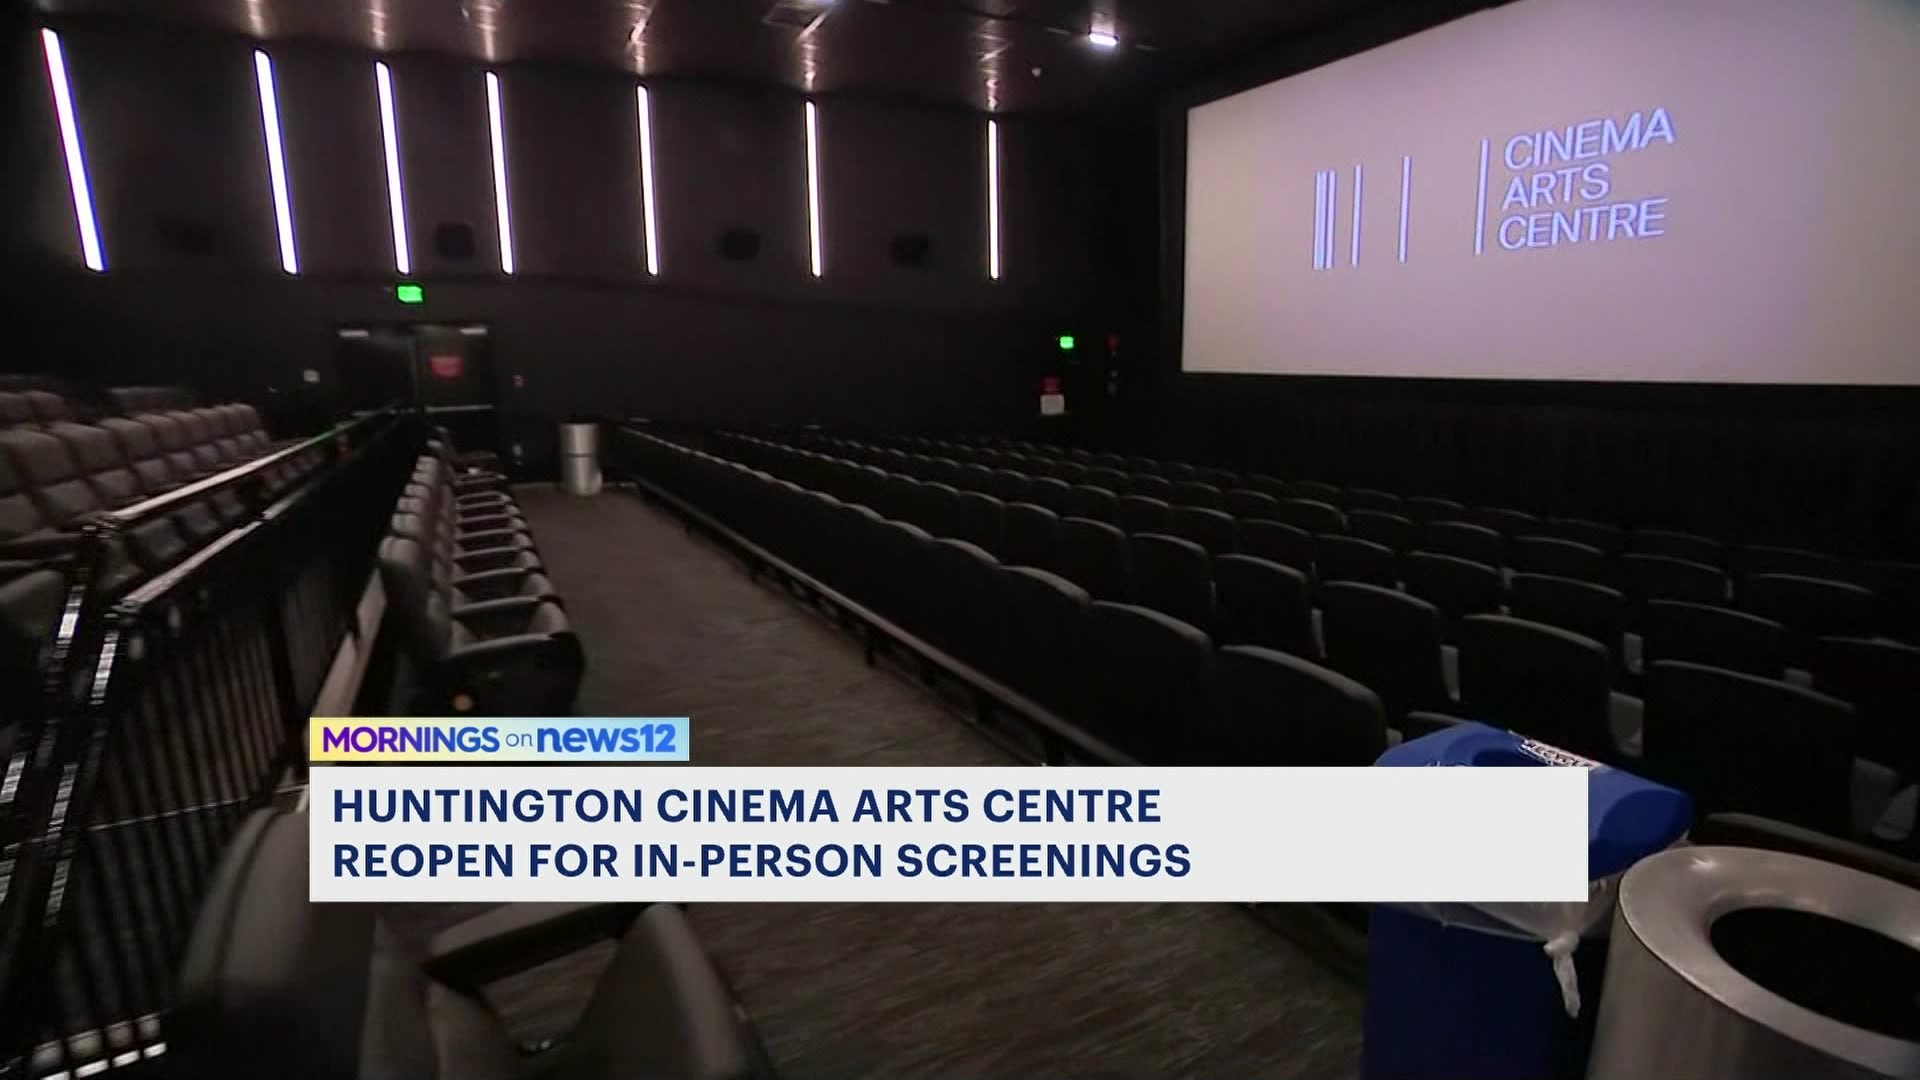 Huntington Cinema Arts Centre reopens for inperson screenings